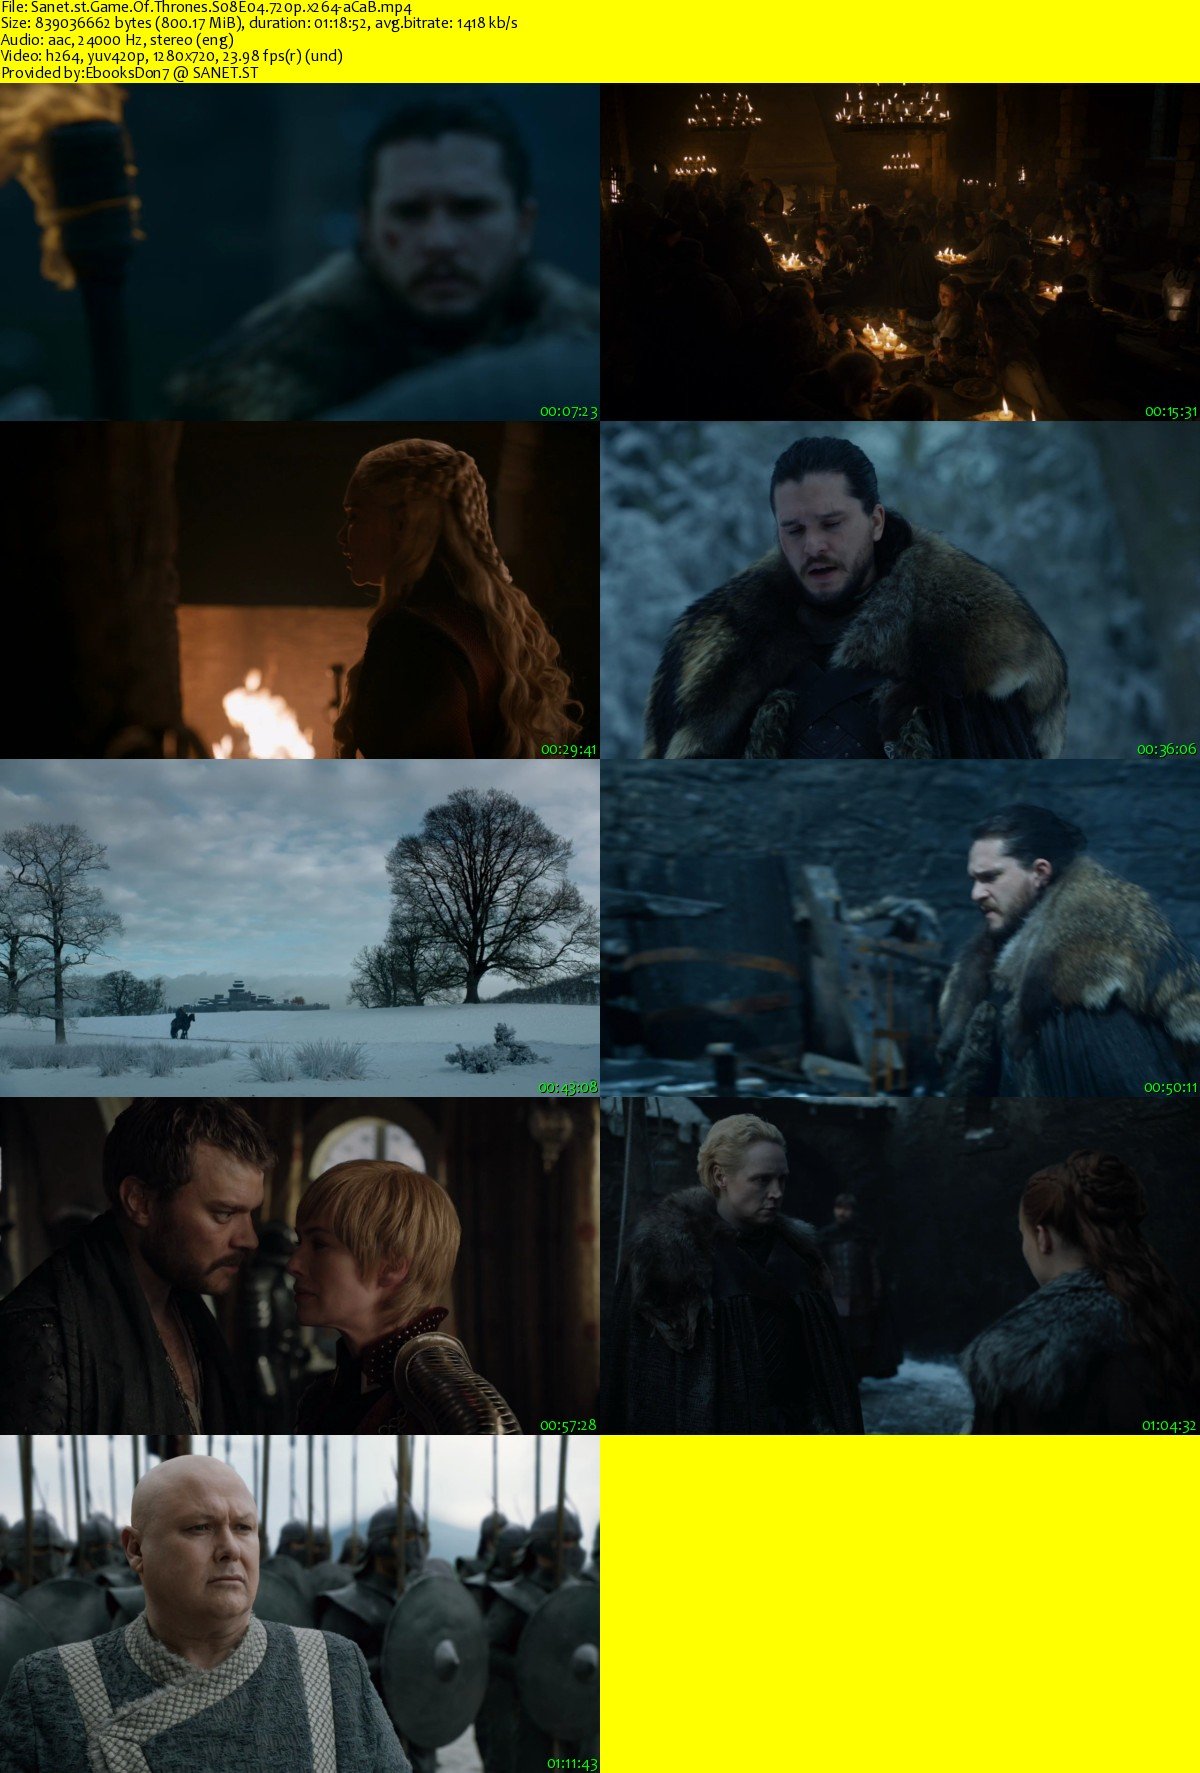 Download Game Of Thrones S08e04 720p X264 Acab Softarchive